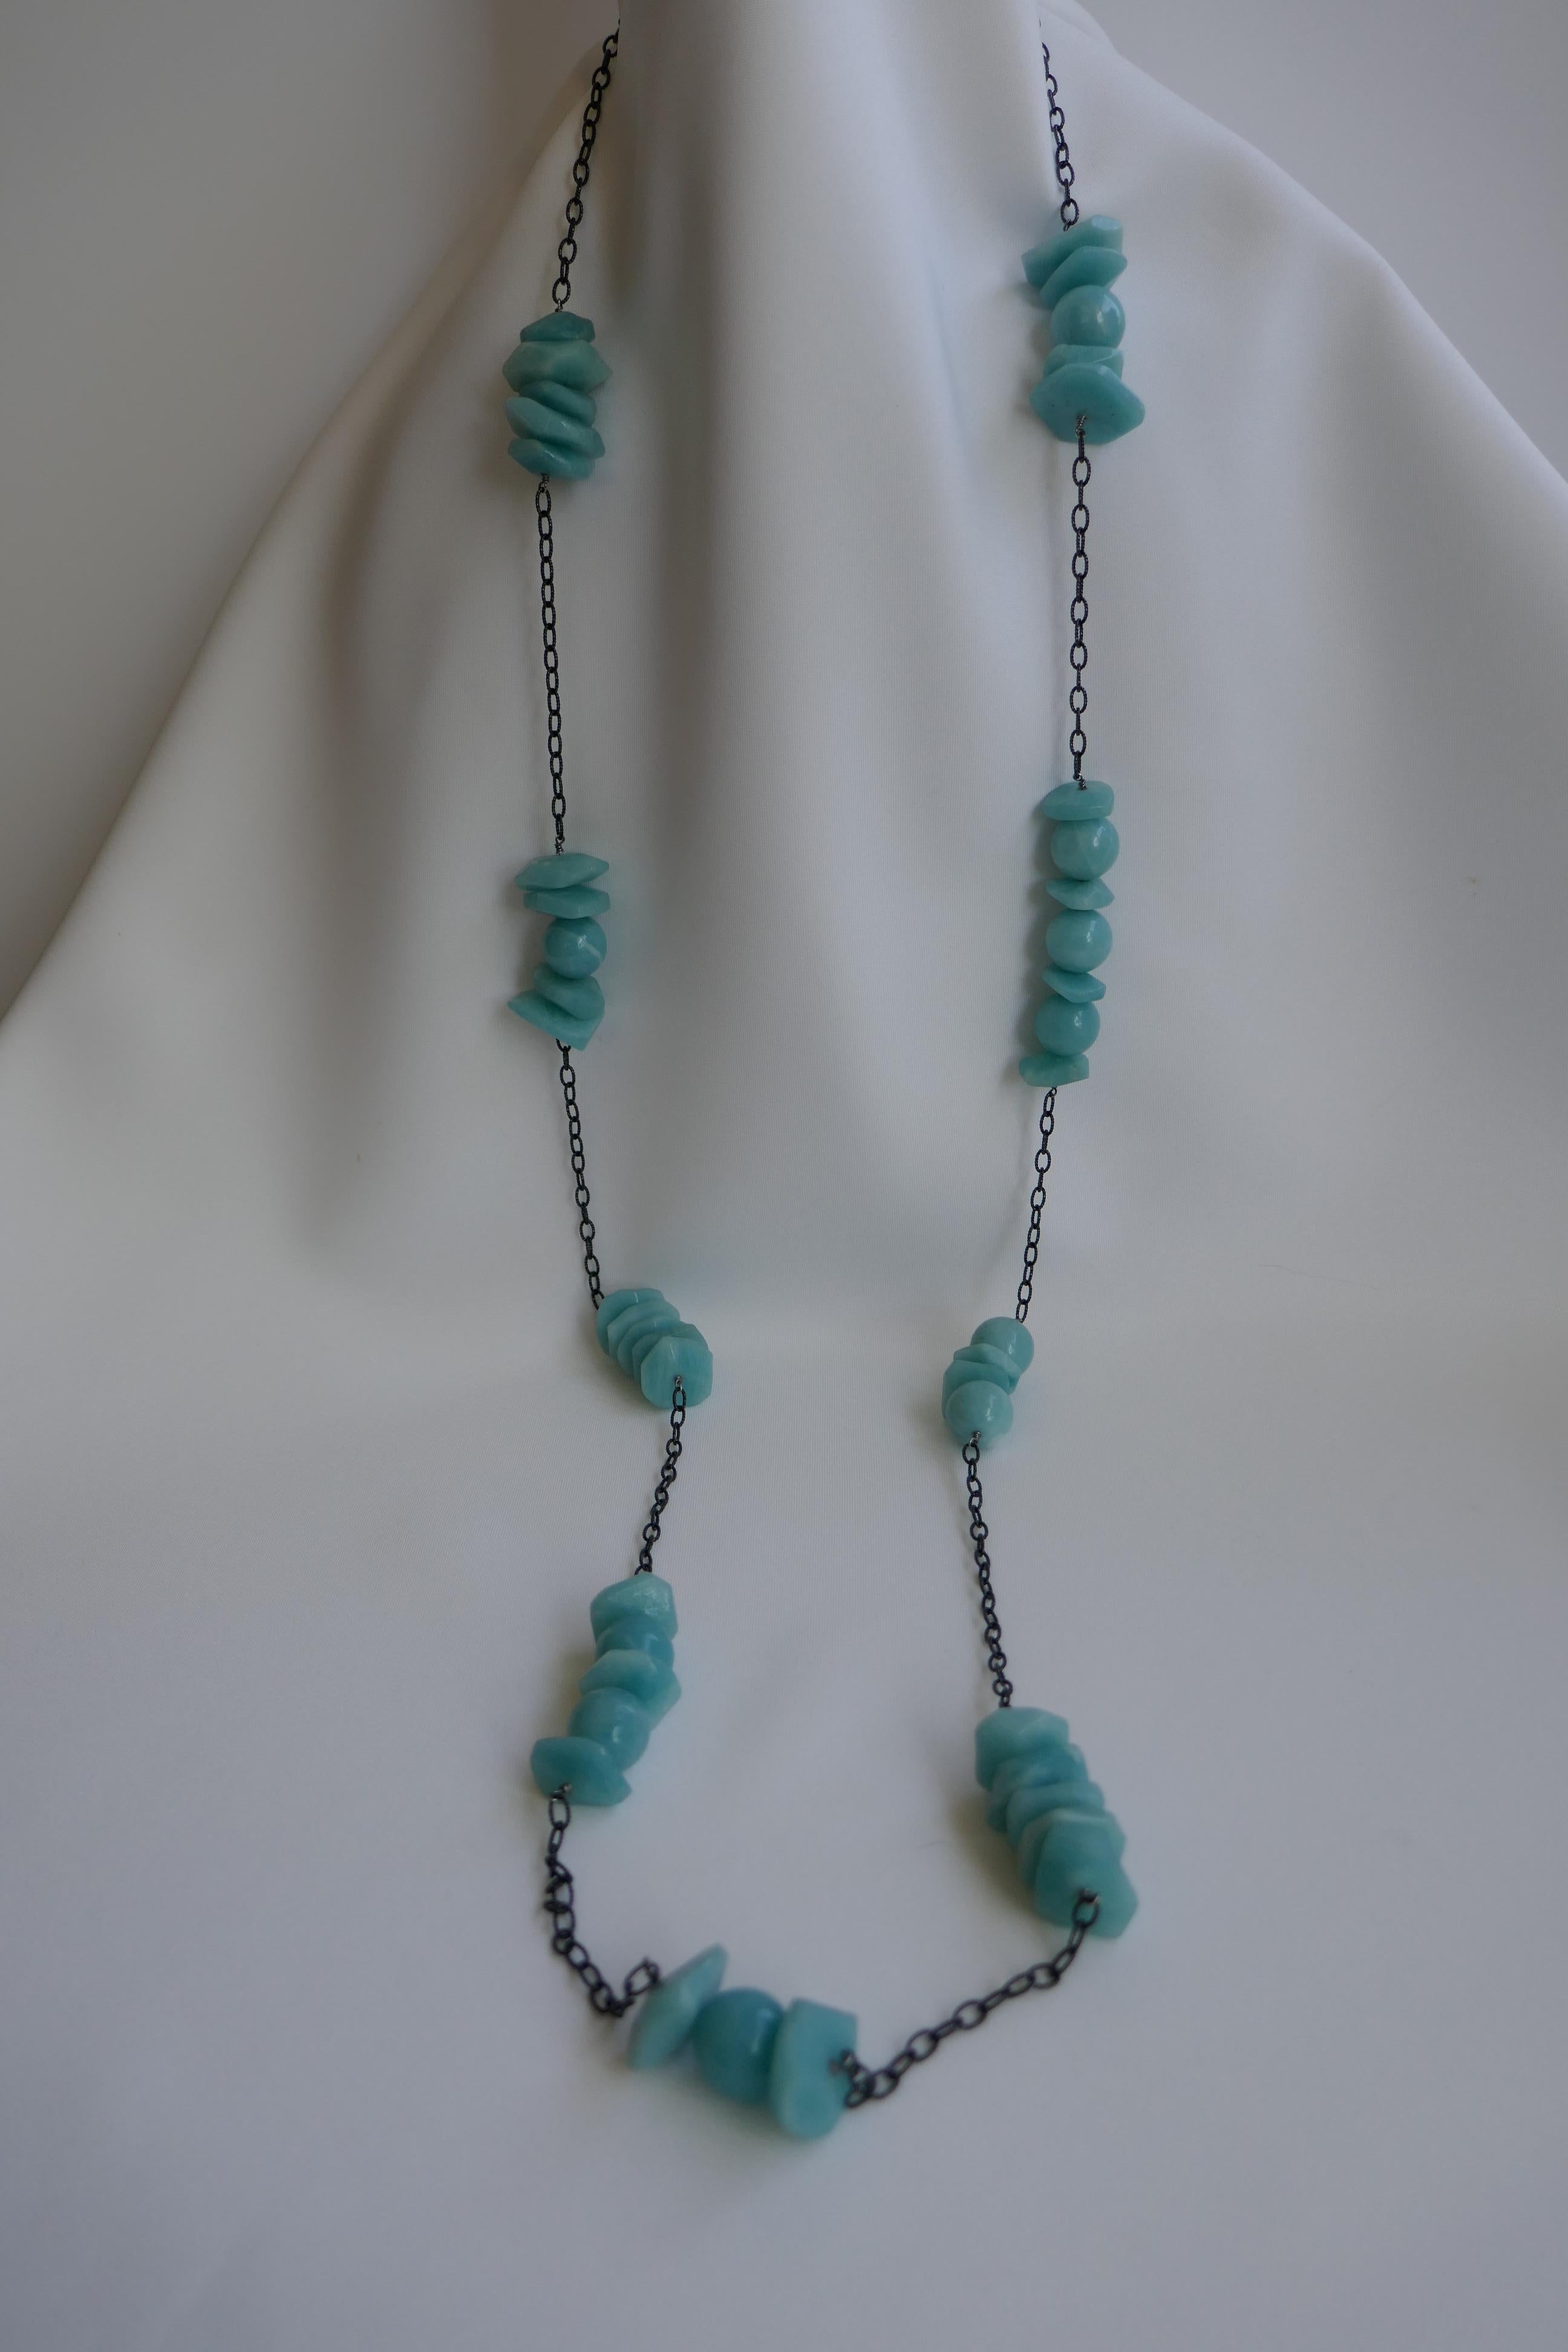 The chain is 925 rhodium plated oxidized silver with two shapes of amazonite gemstones 14mm. The necklace can be worn long or doubled and layered with other pieces. The necklace was designed by Lucy de la Vega/de la Vega designs and made in the U.S.